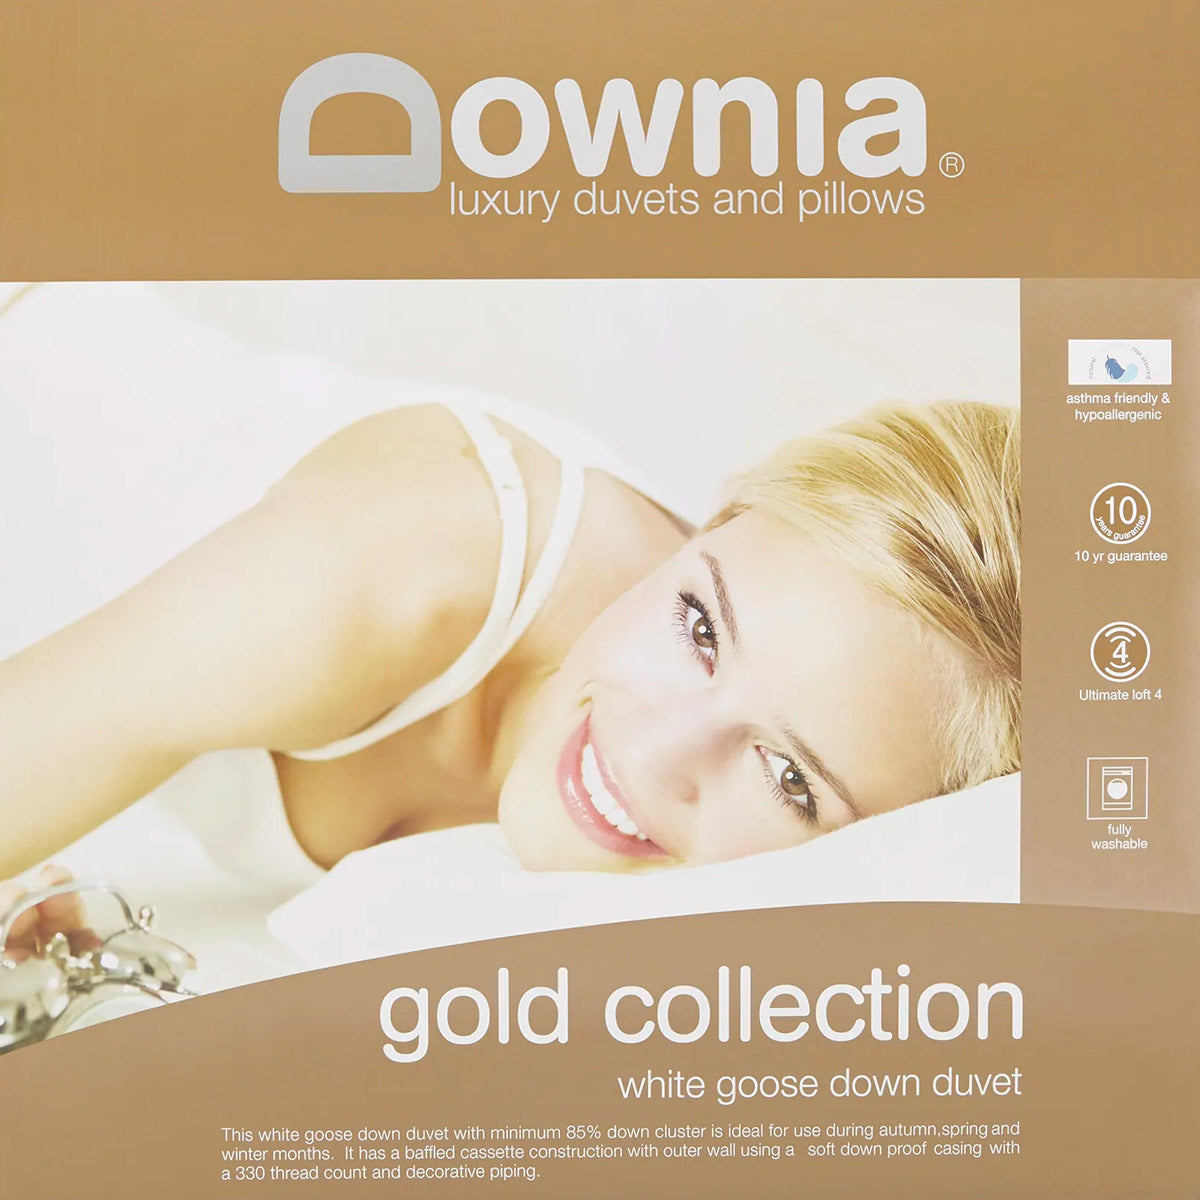 Gold Collection White Goose Down Quilt by Downia